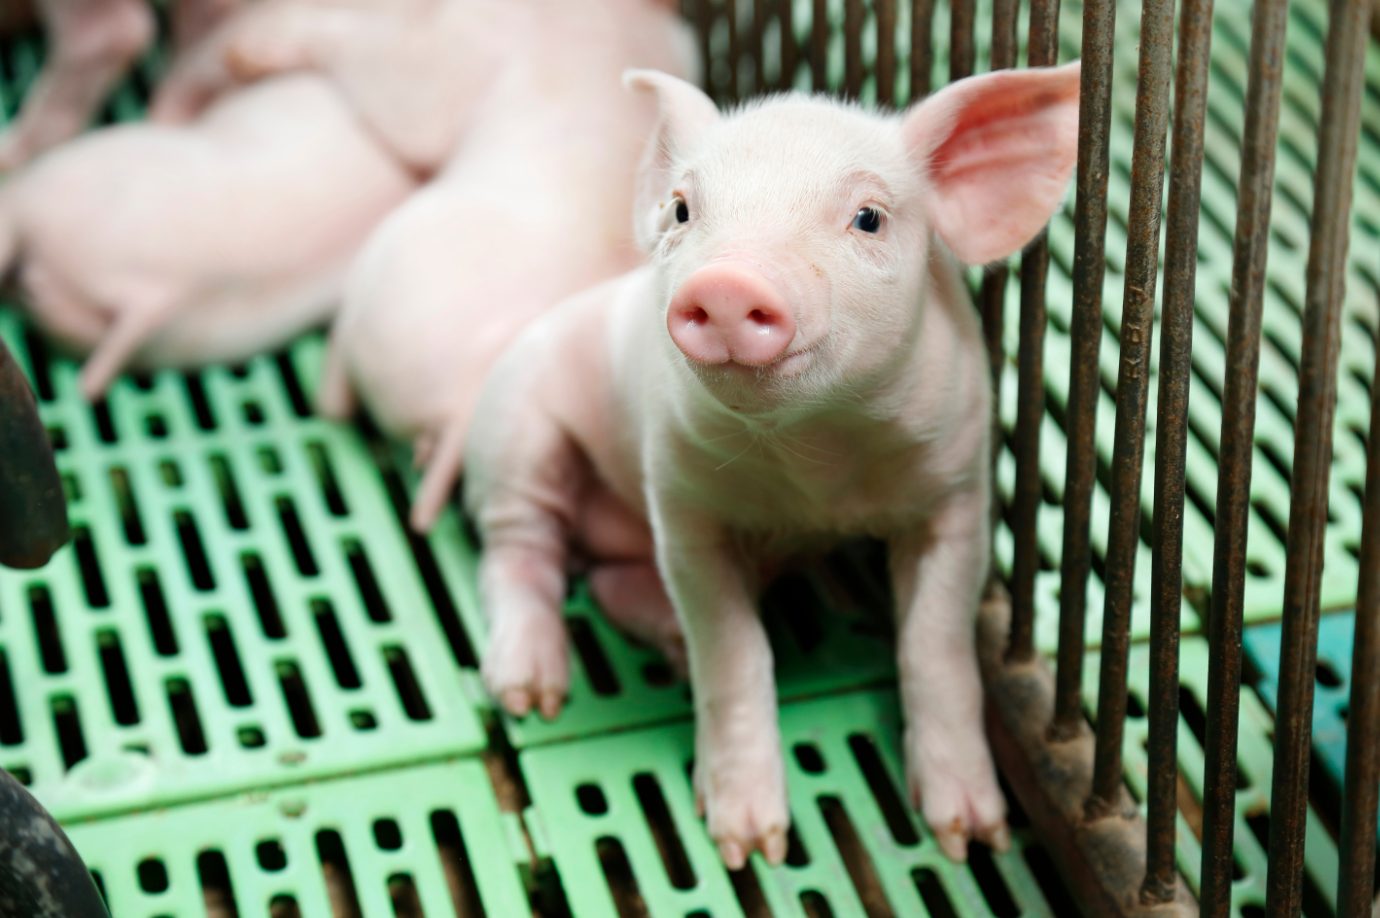 Influence of lipids on the intestinal health of piglets